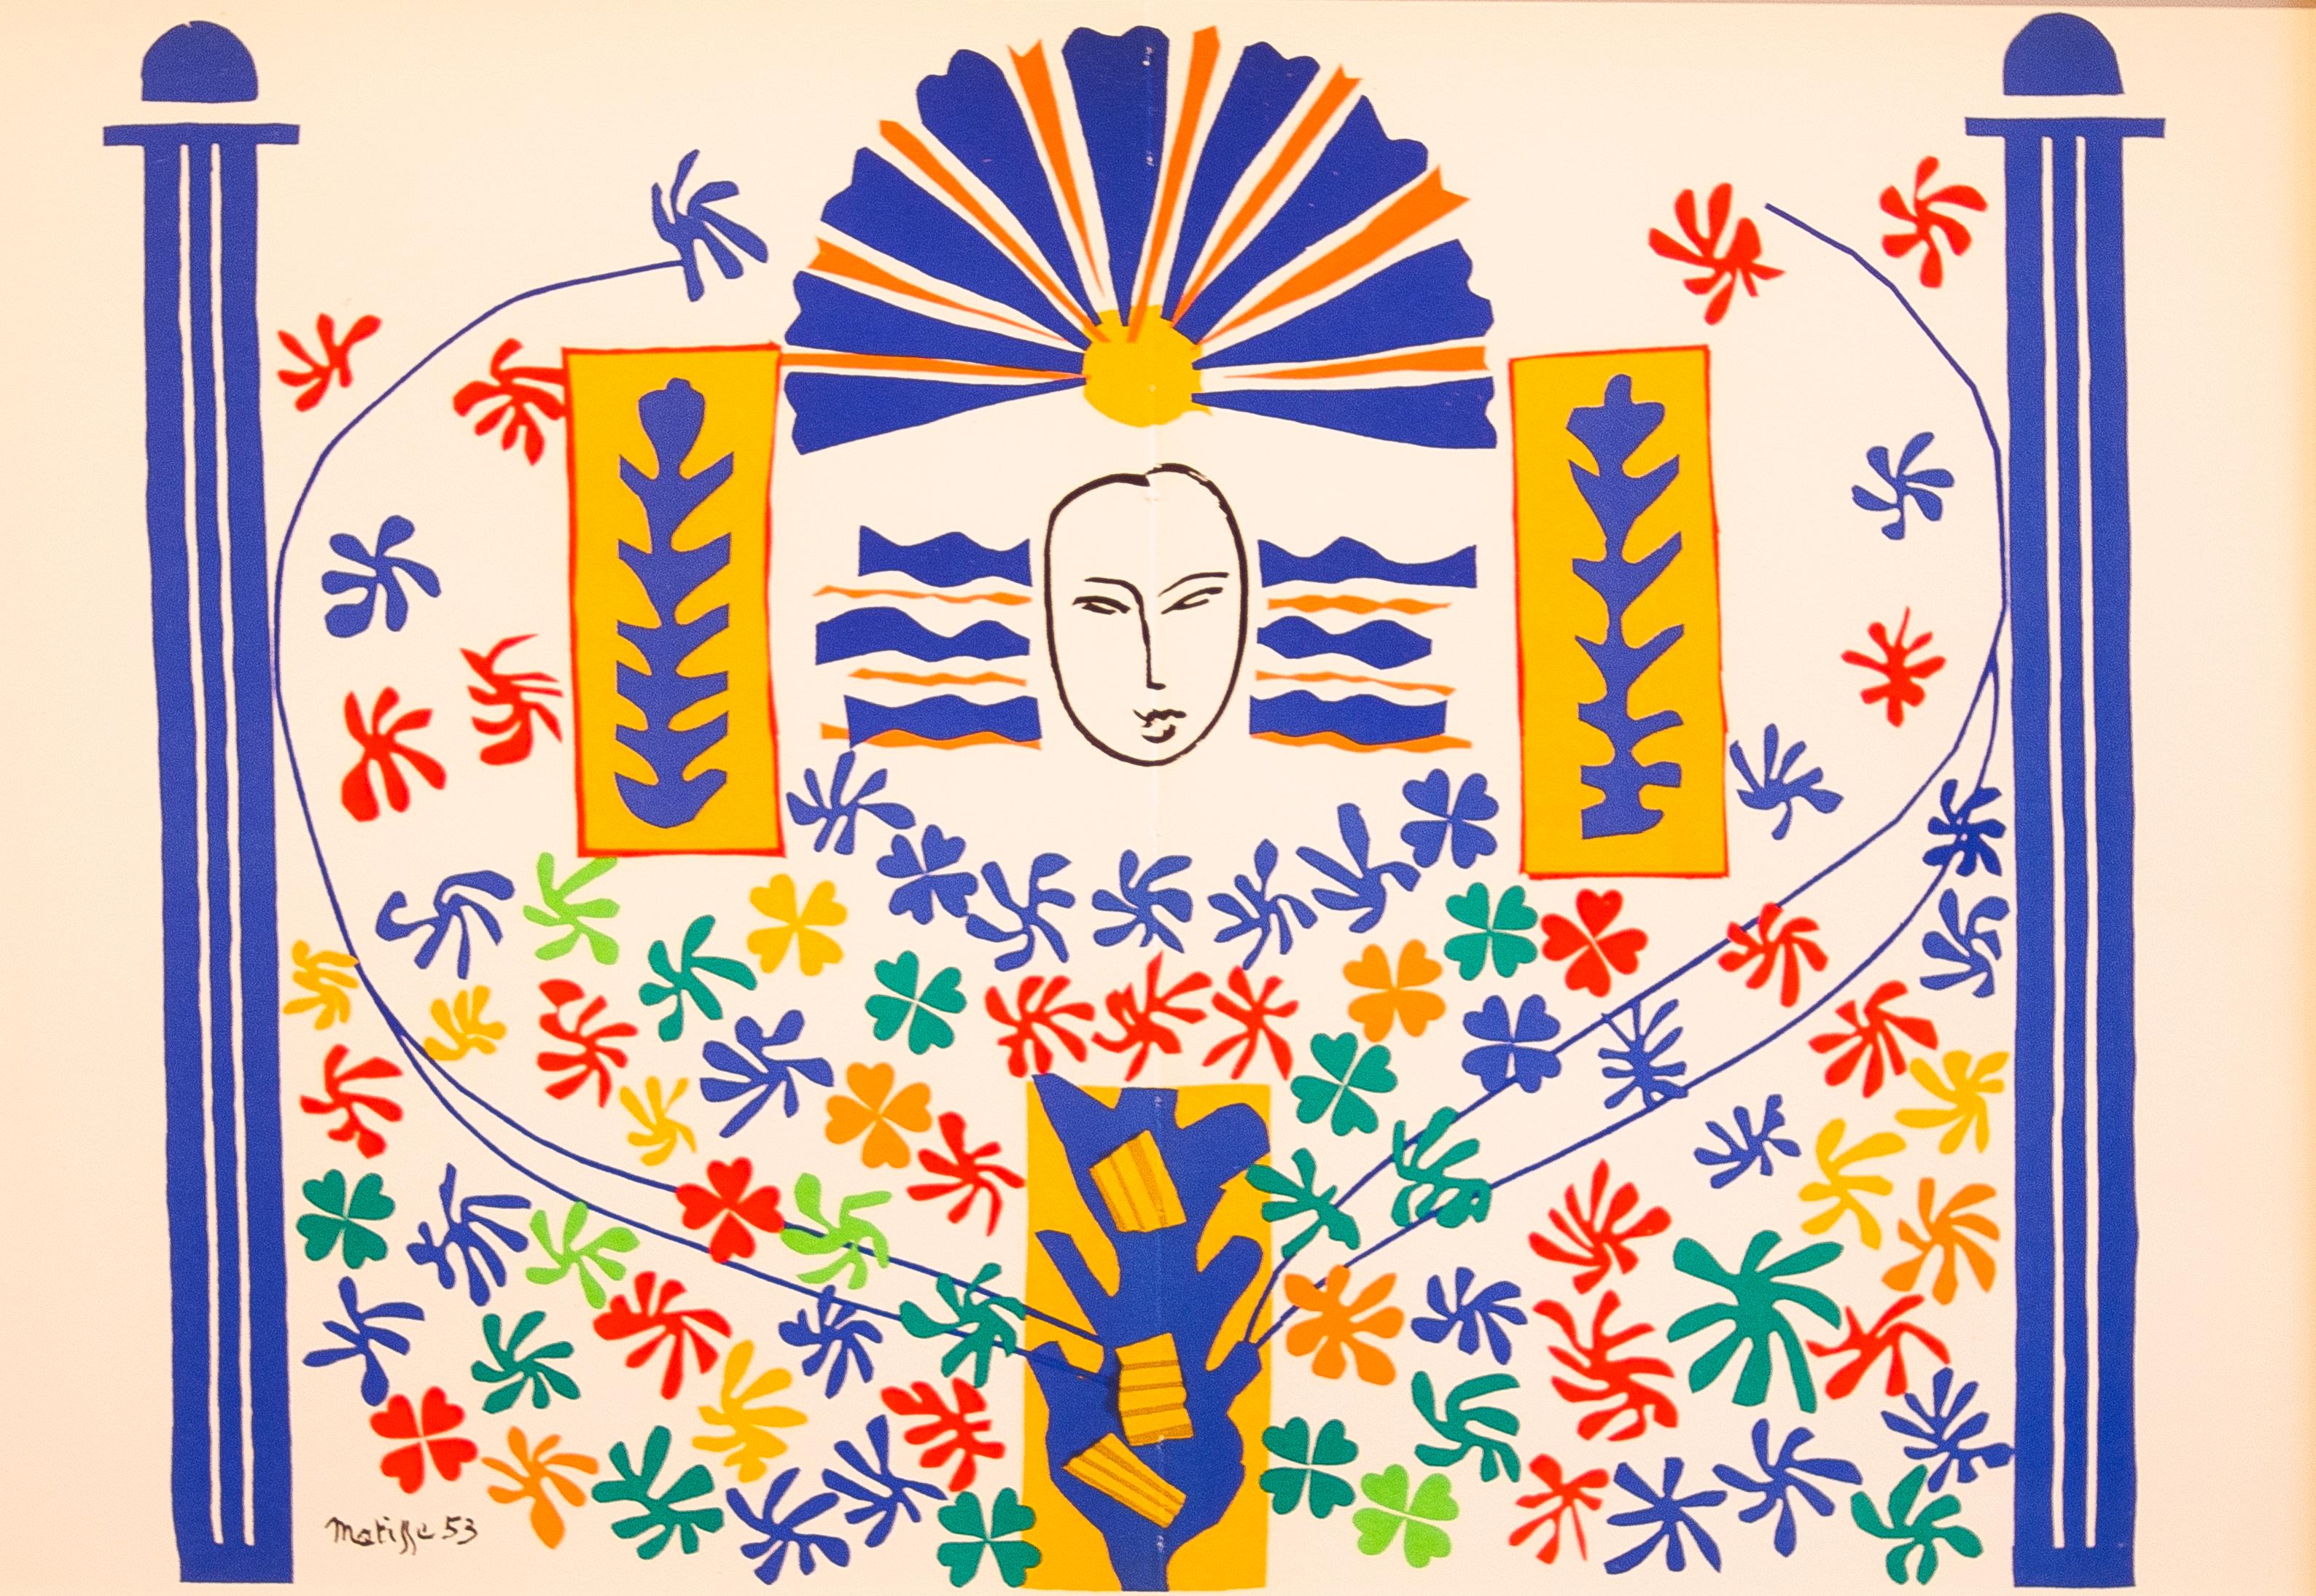 Henri Matisse Abstract Print – Apollon, Expressionist, colorful, framed lithograph